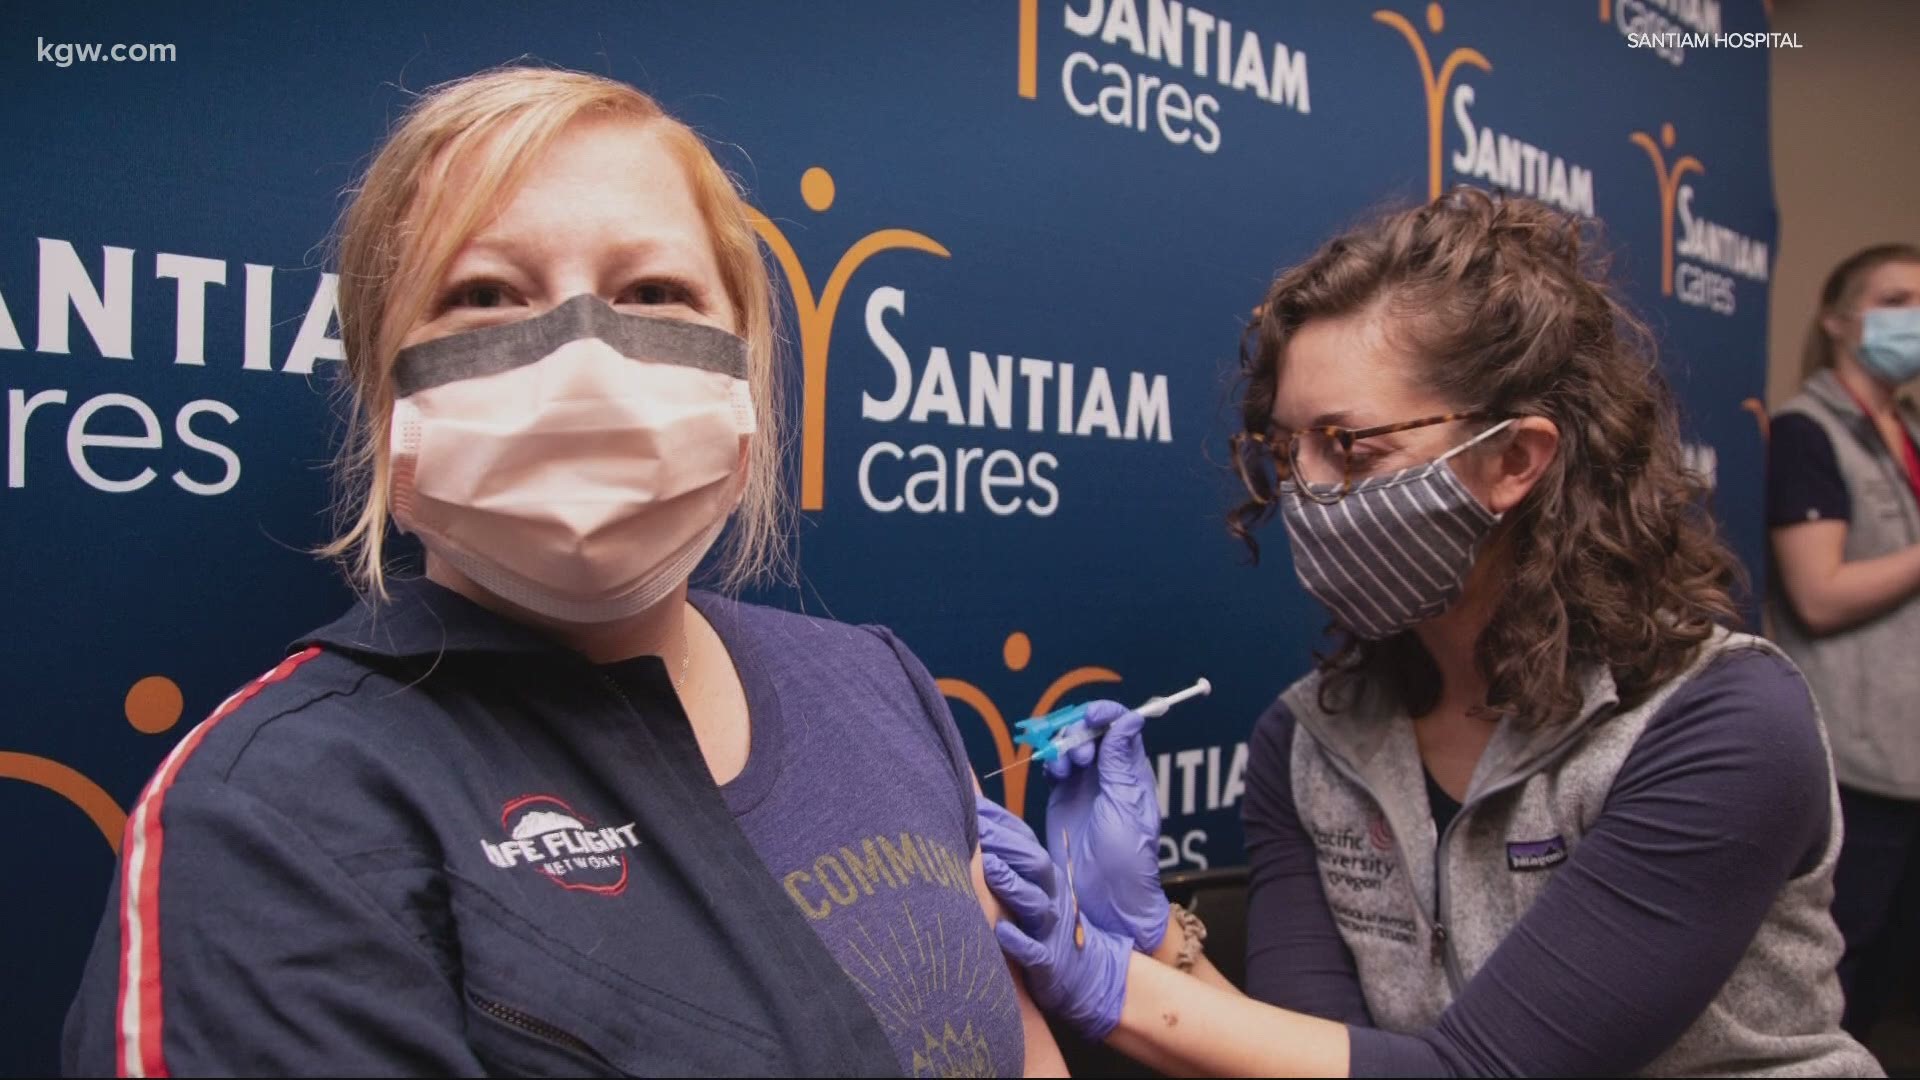 This week Santiam Hospital began vaccinating first responders and other health care workers in the community.